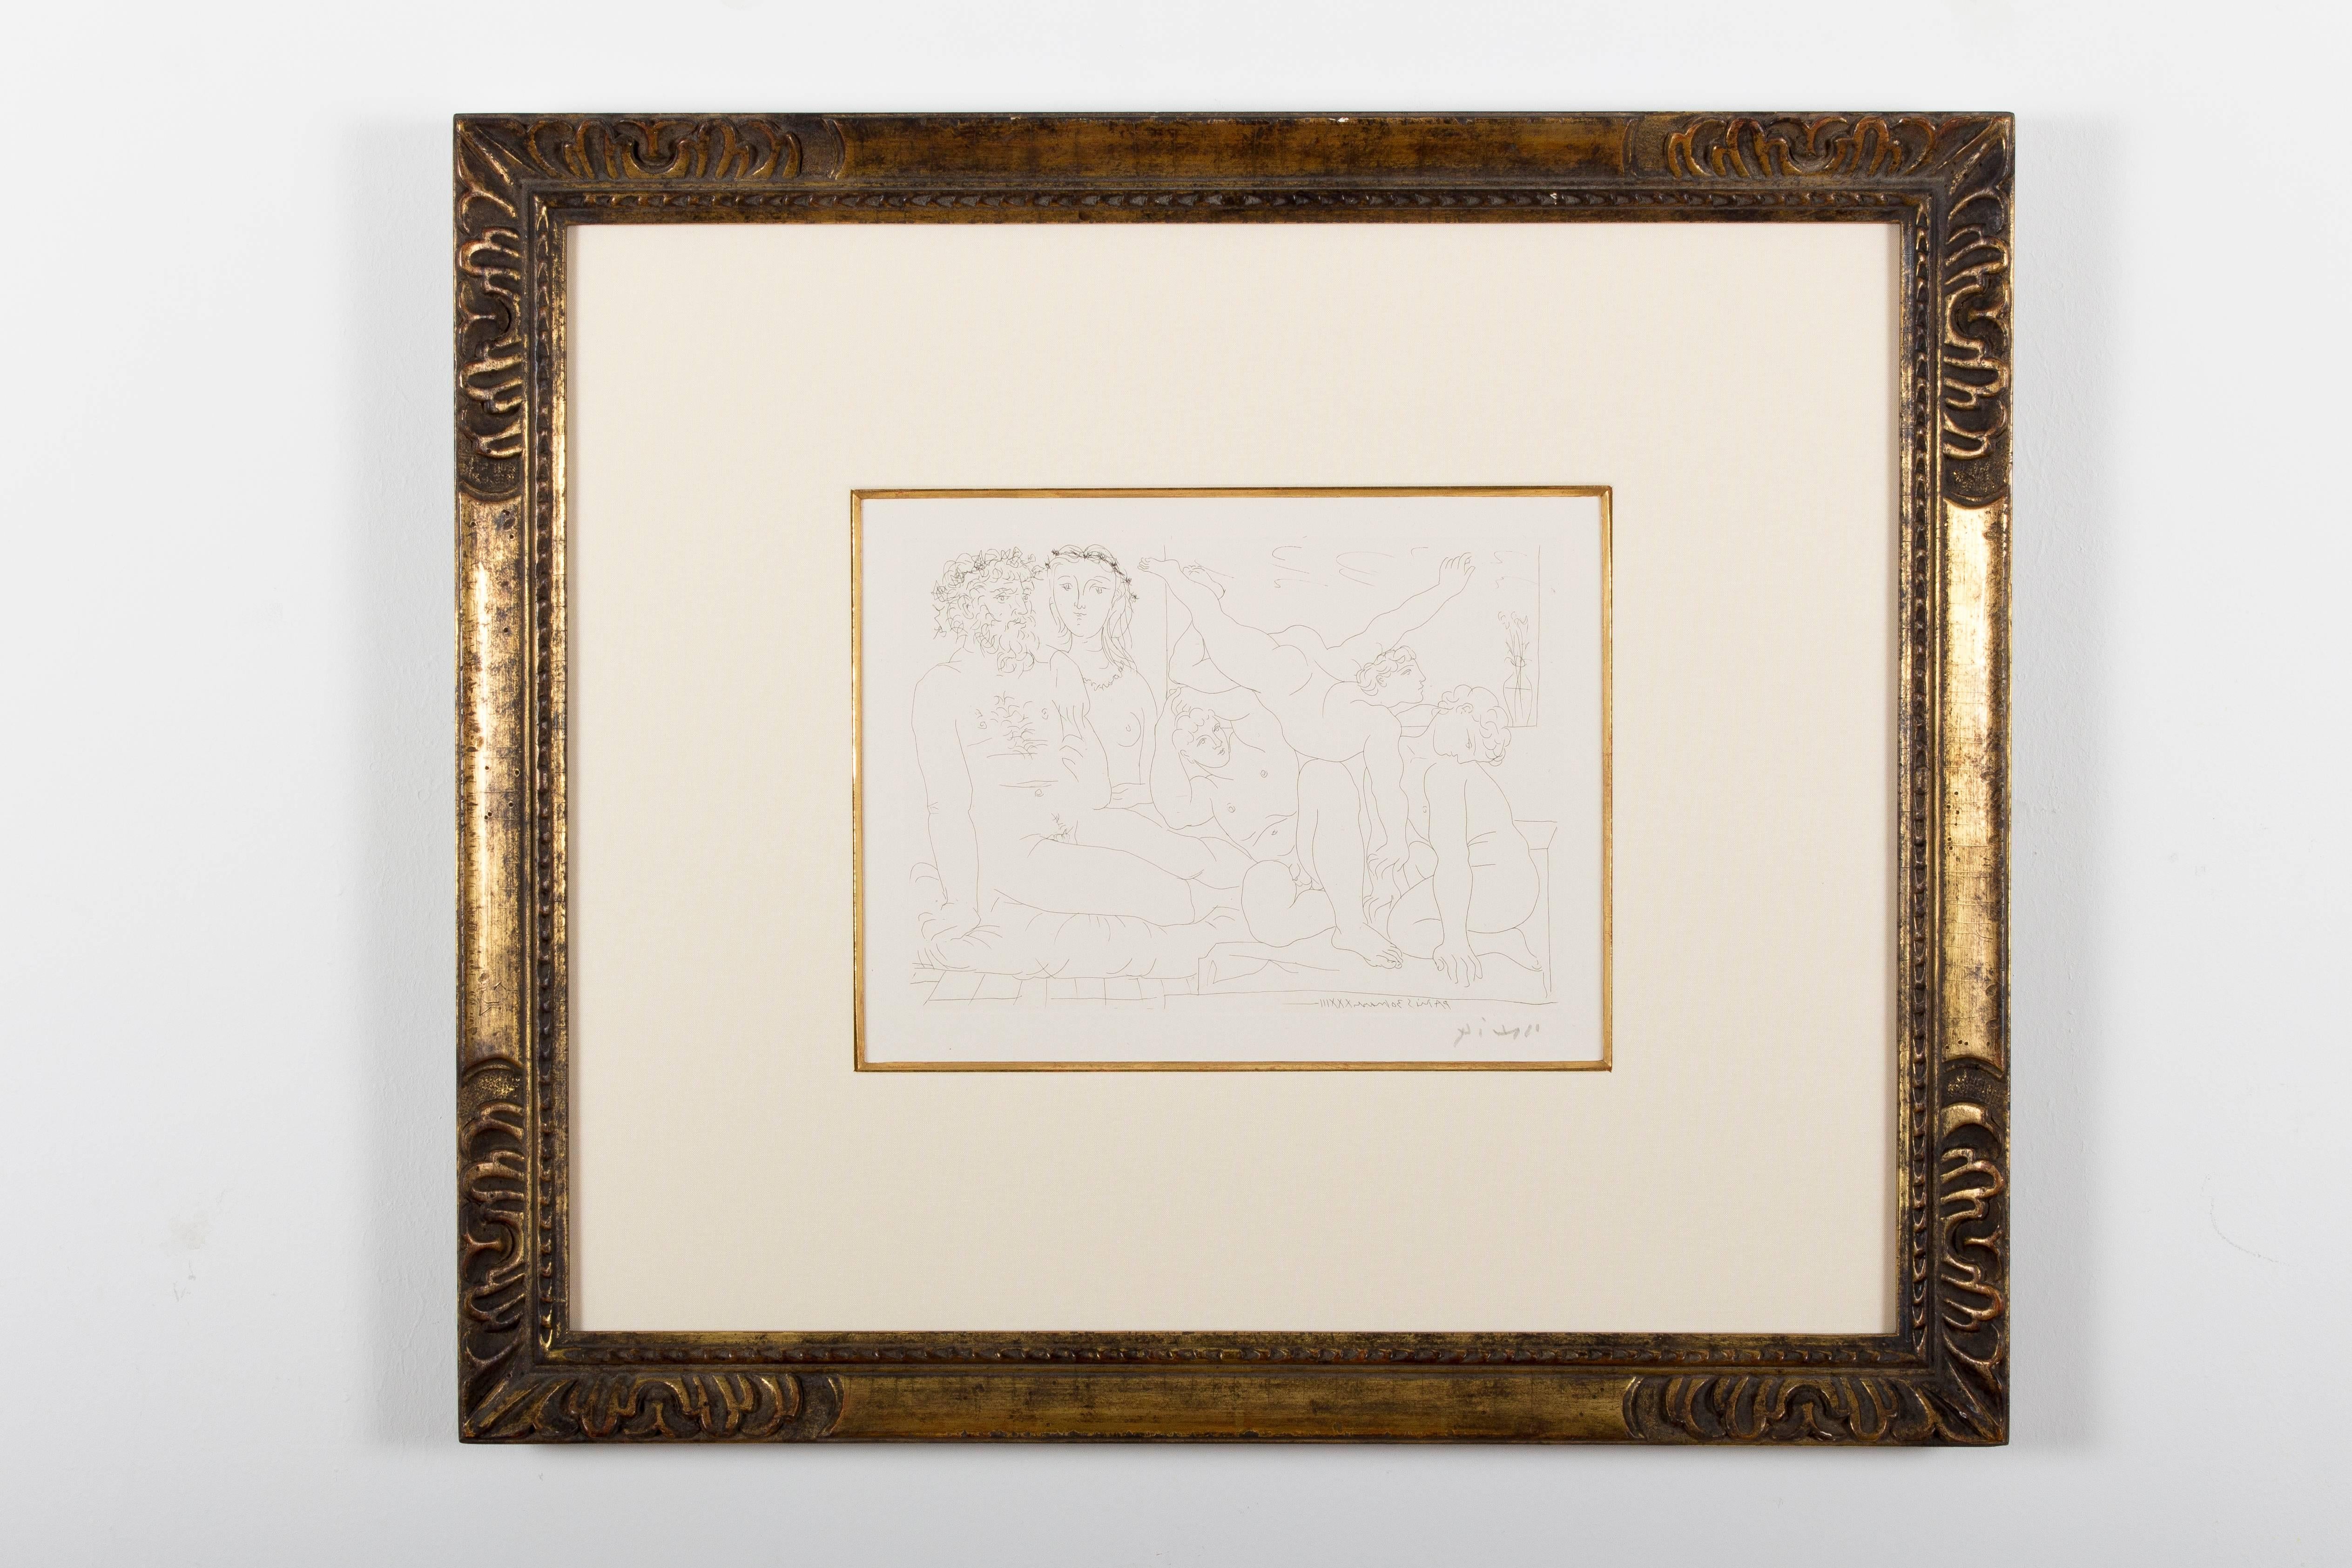 Picasso, Suite Vollard, Sculptor and Modell with a Group of Athletes - Print by Pablo Picasso